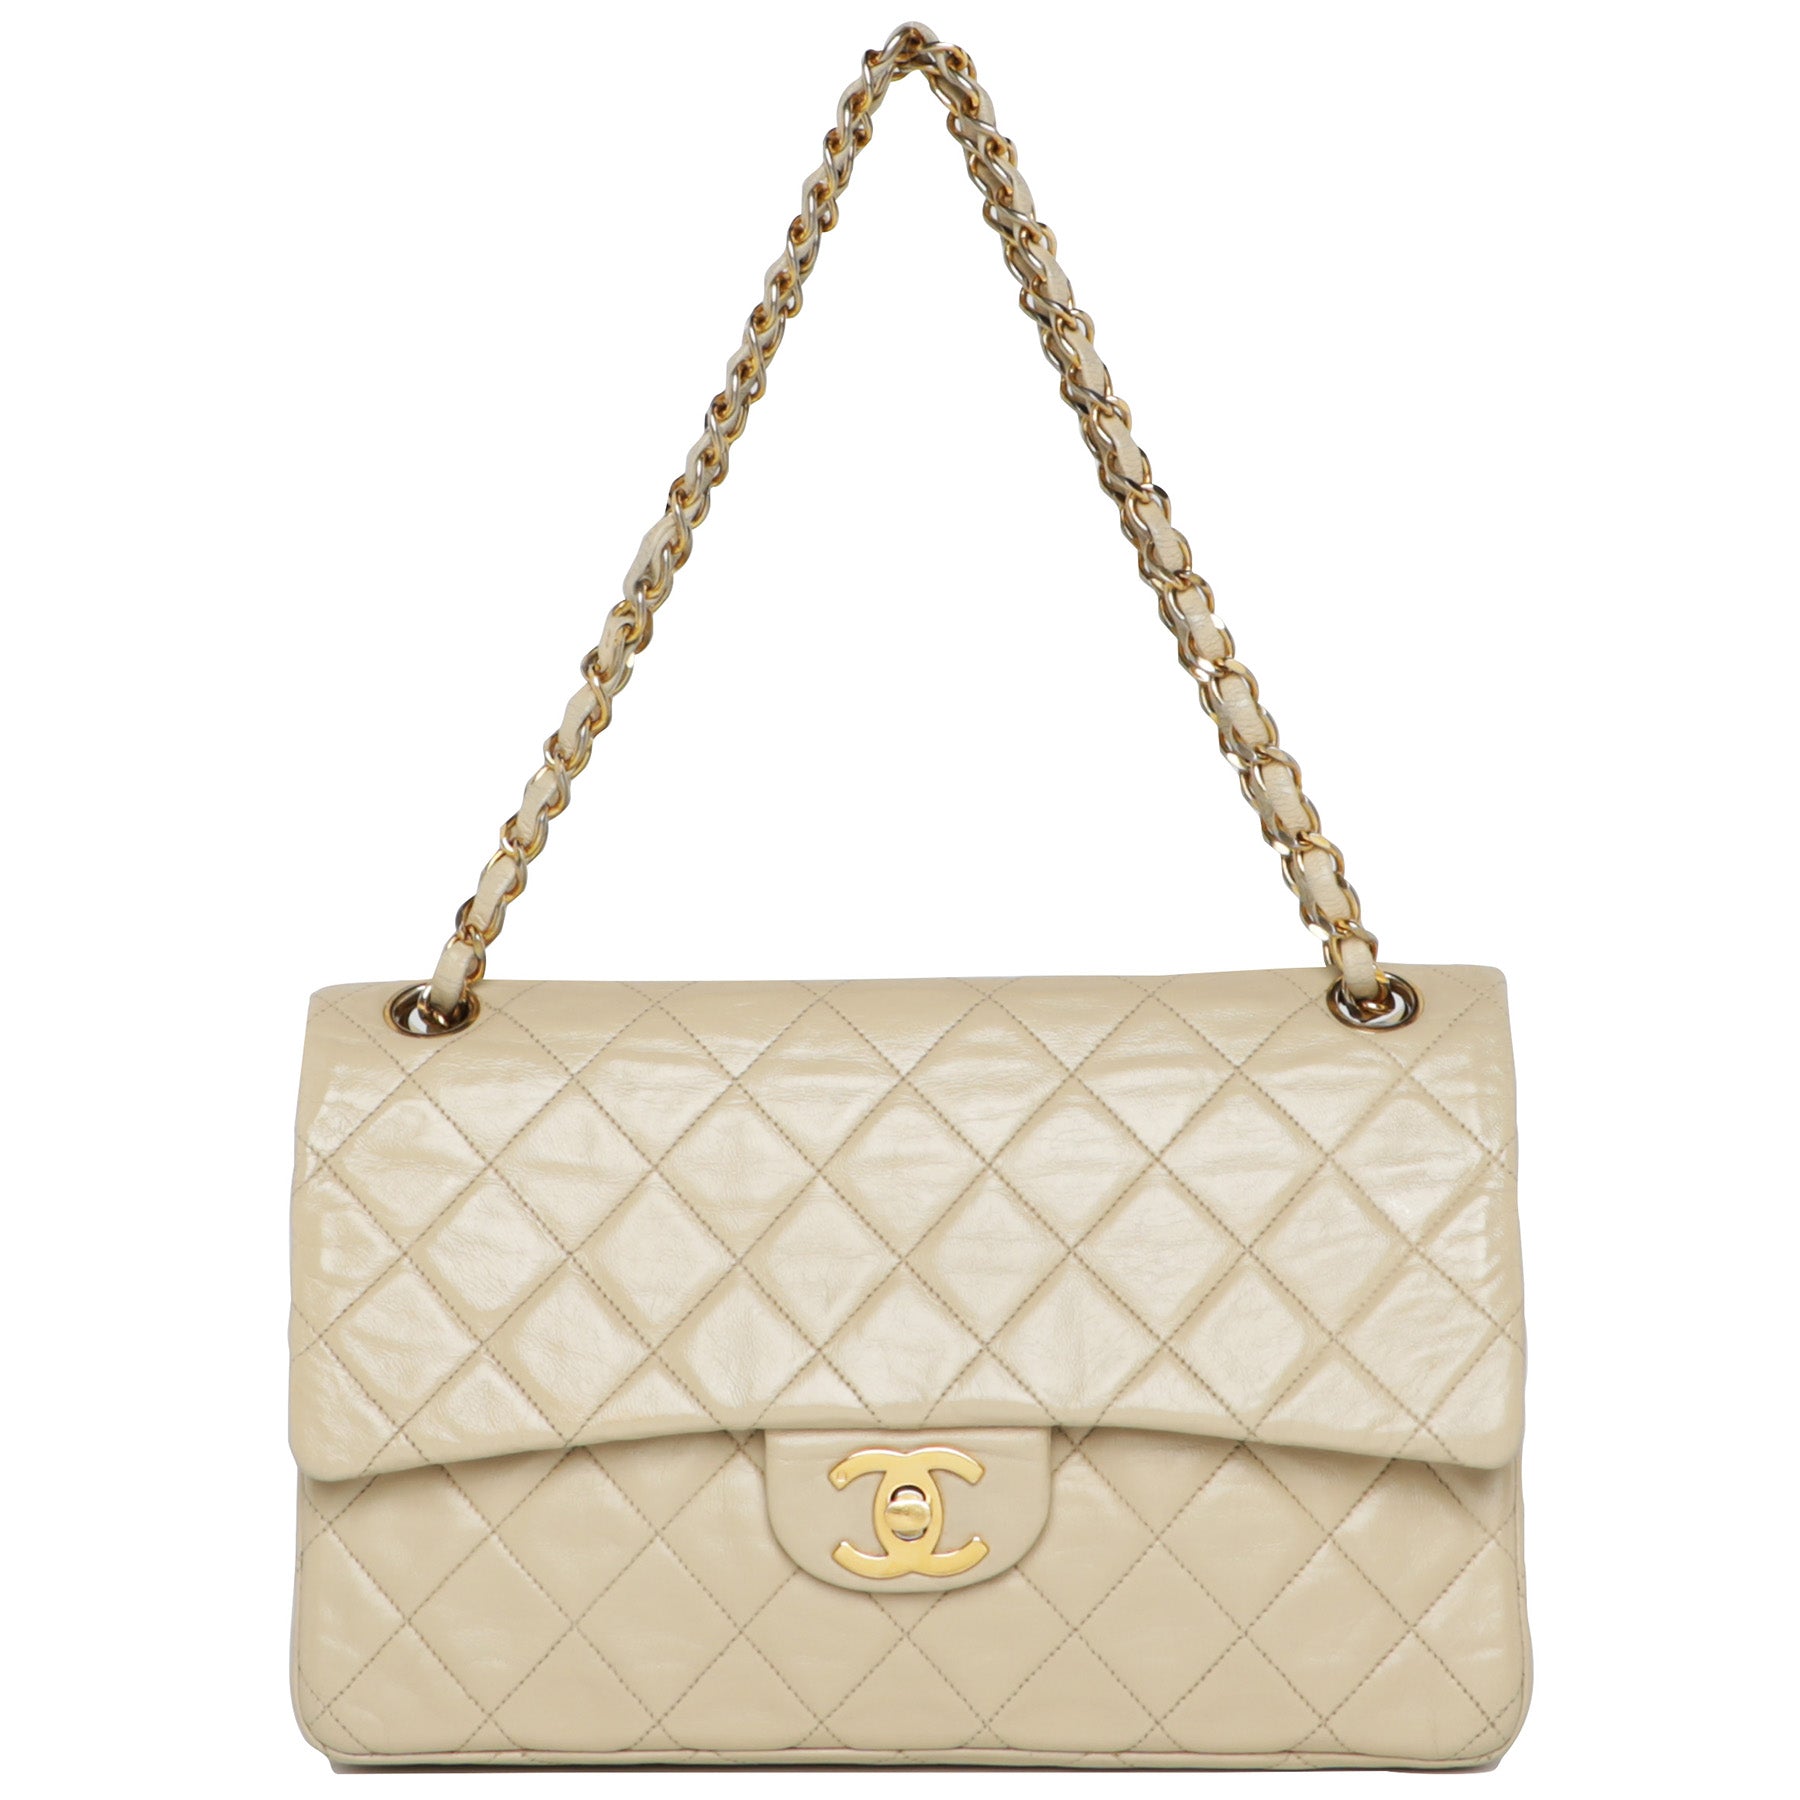 affordable chanel purse